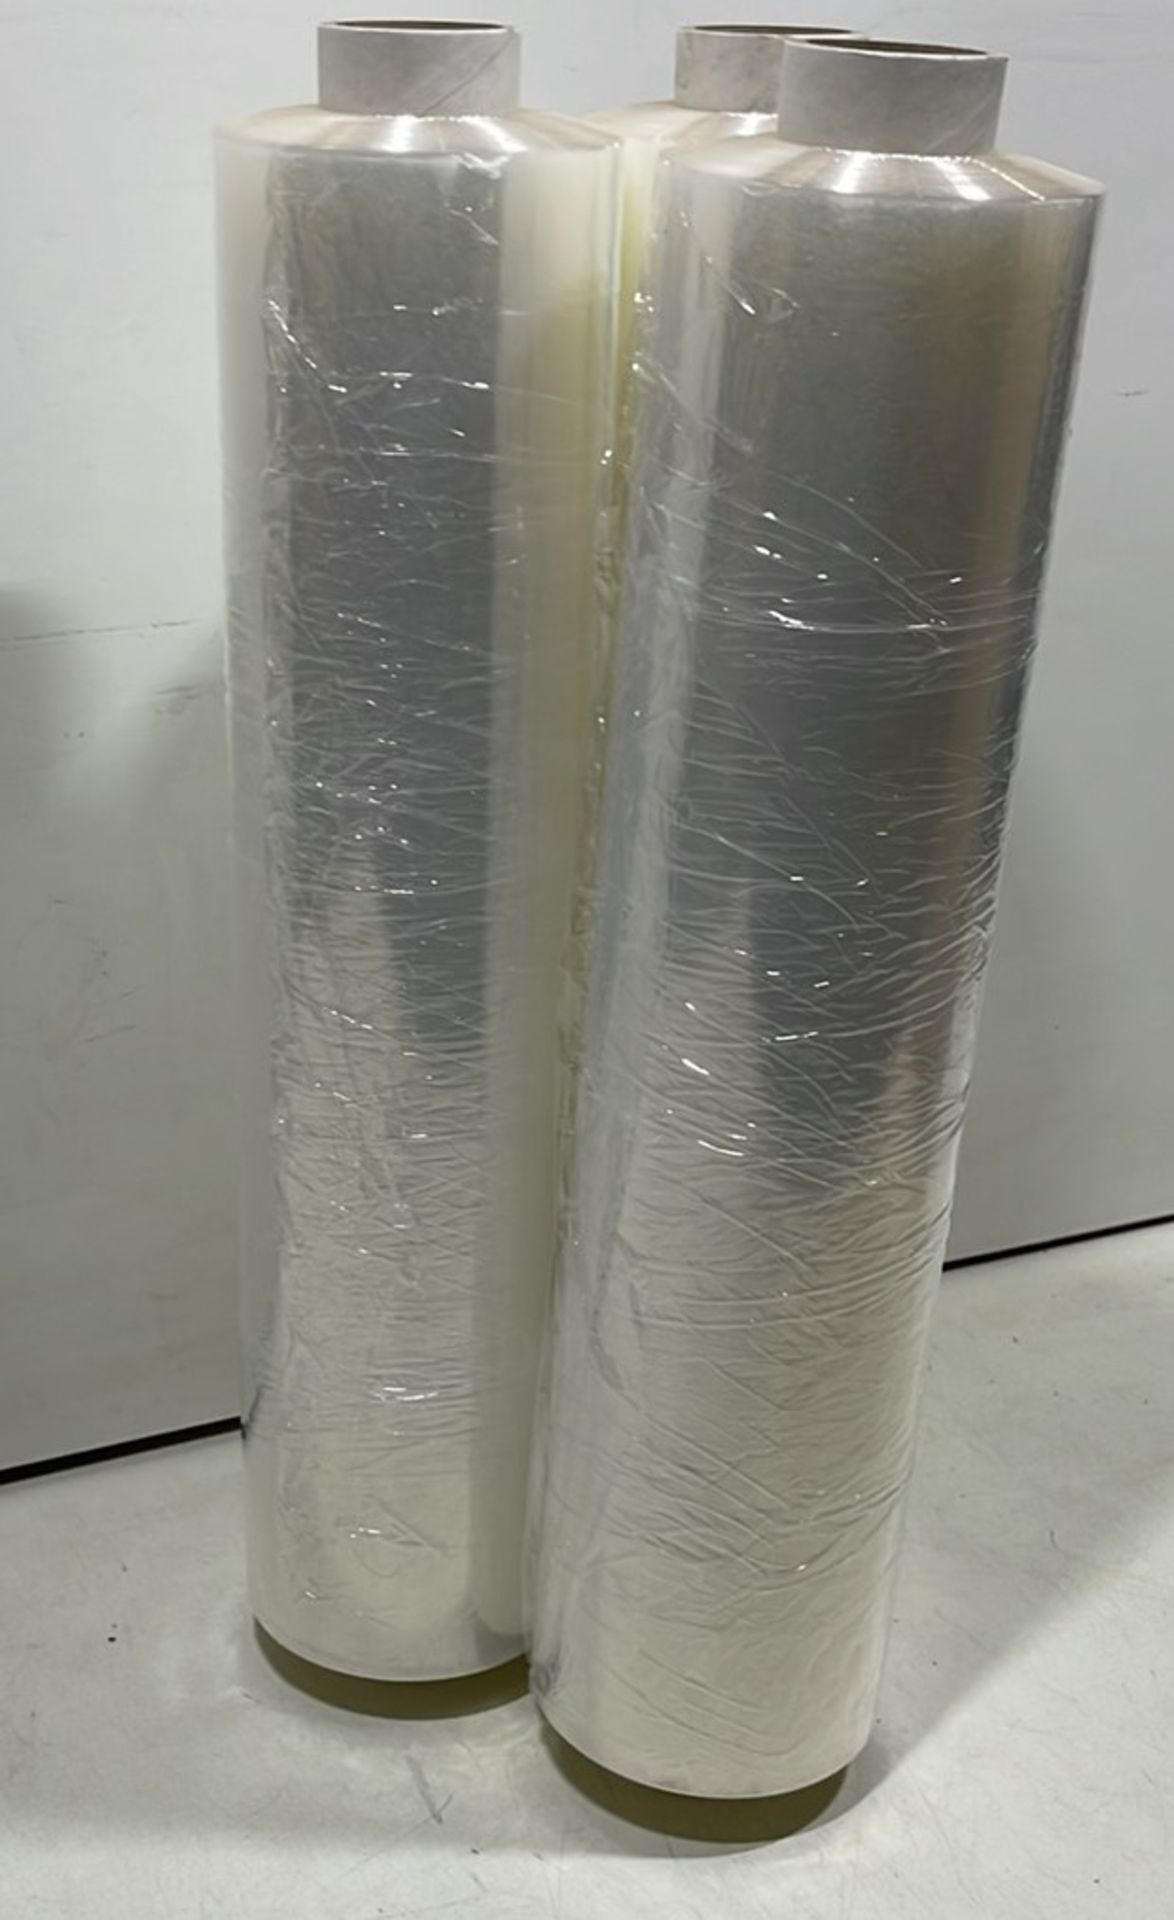 6 x Boxes of 6 x Rolls of Clear Stretch Film - Image 2 of 5